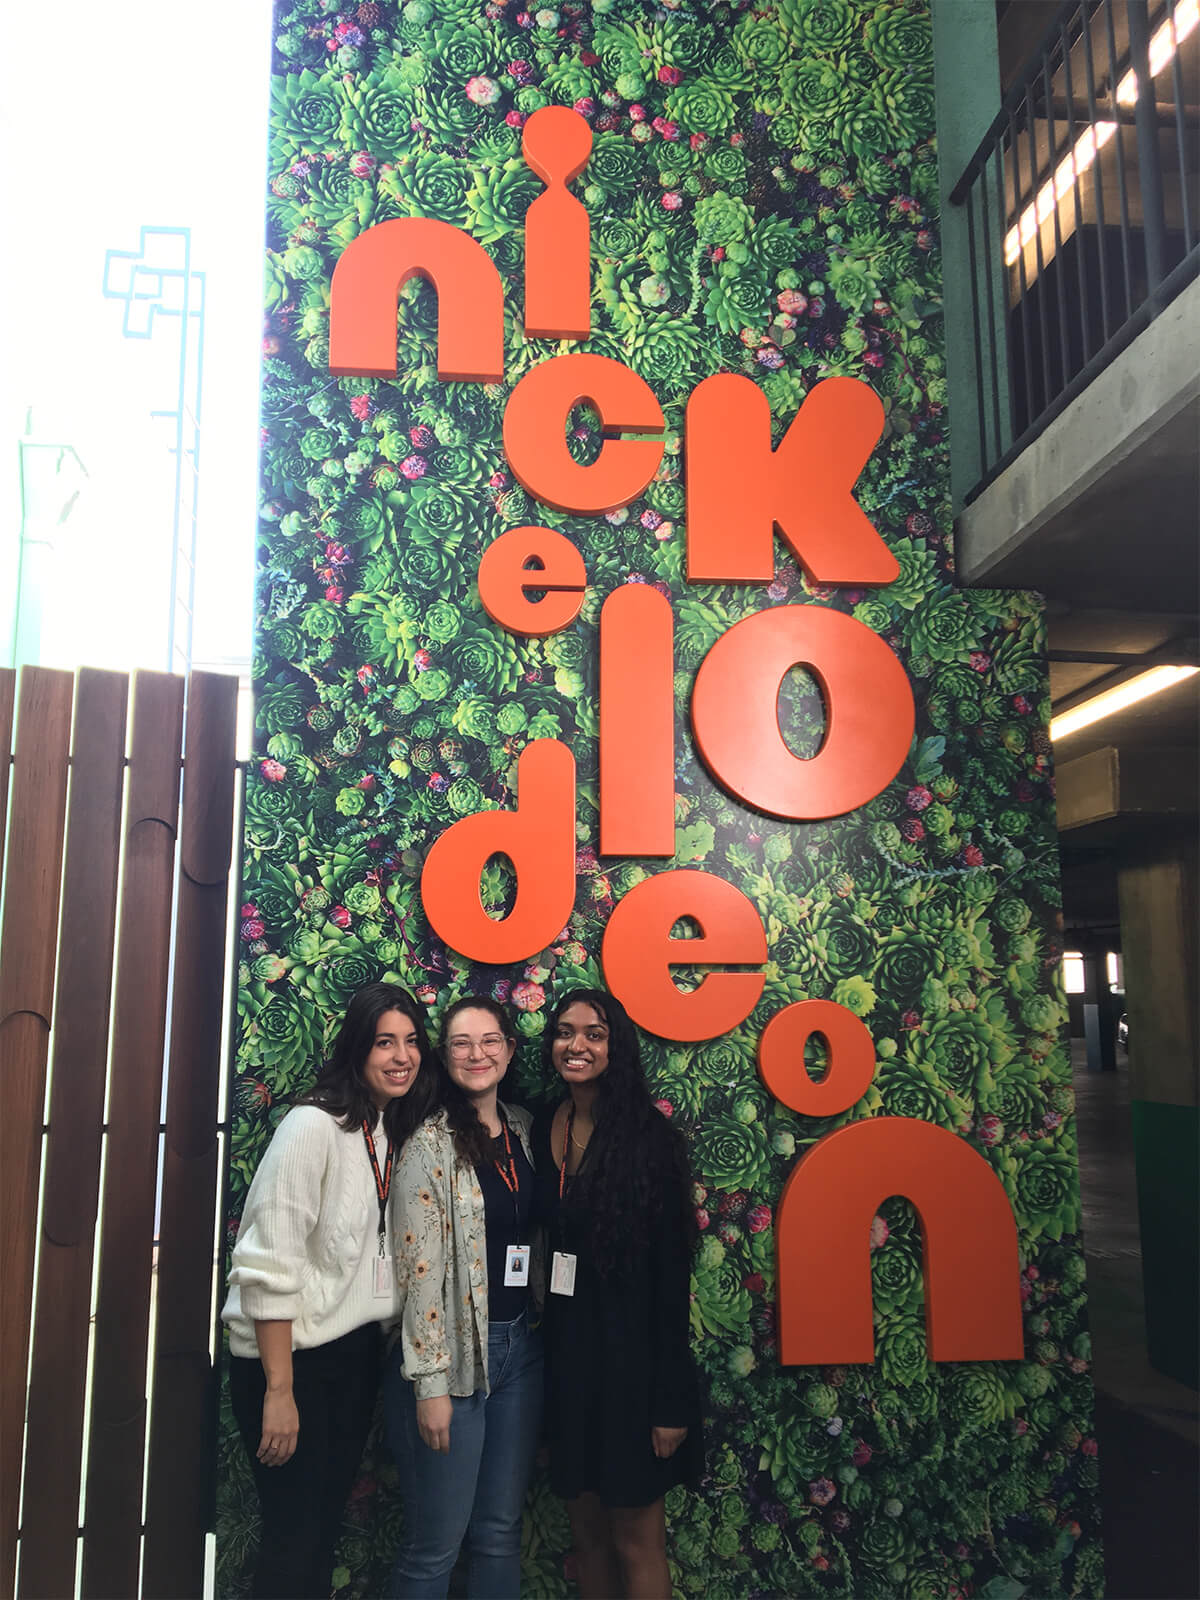 Parayil poses with two other artists in front of a Nickelodeon sign superimposed over pictures of succulents.